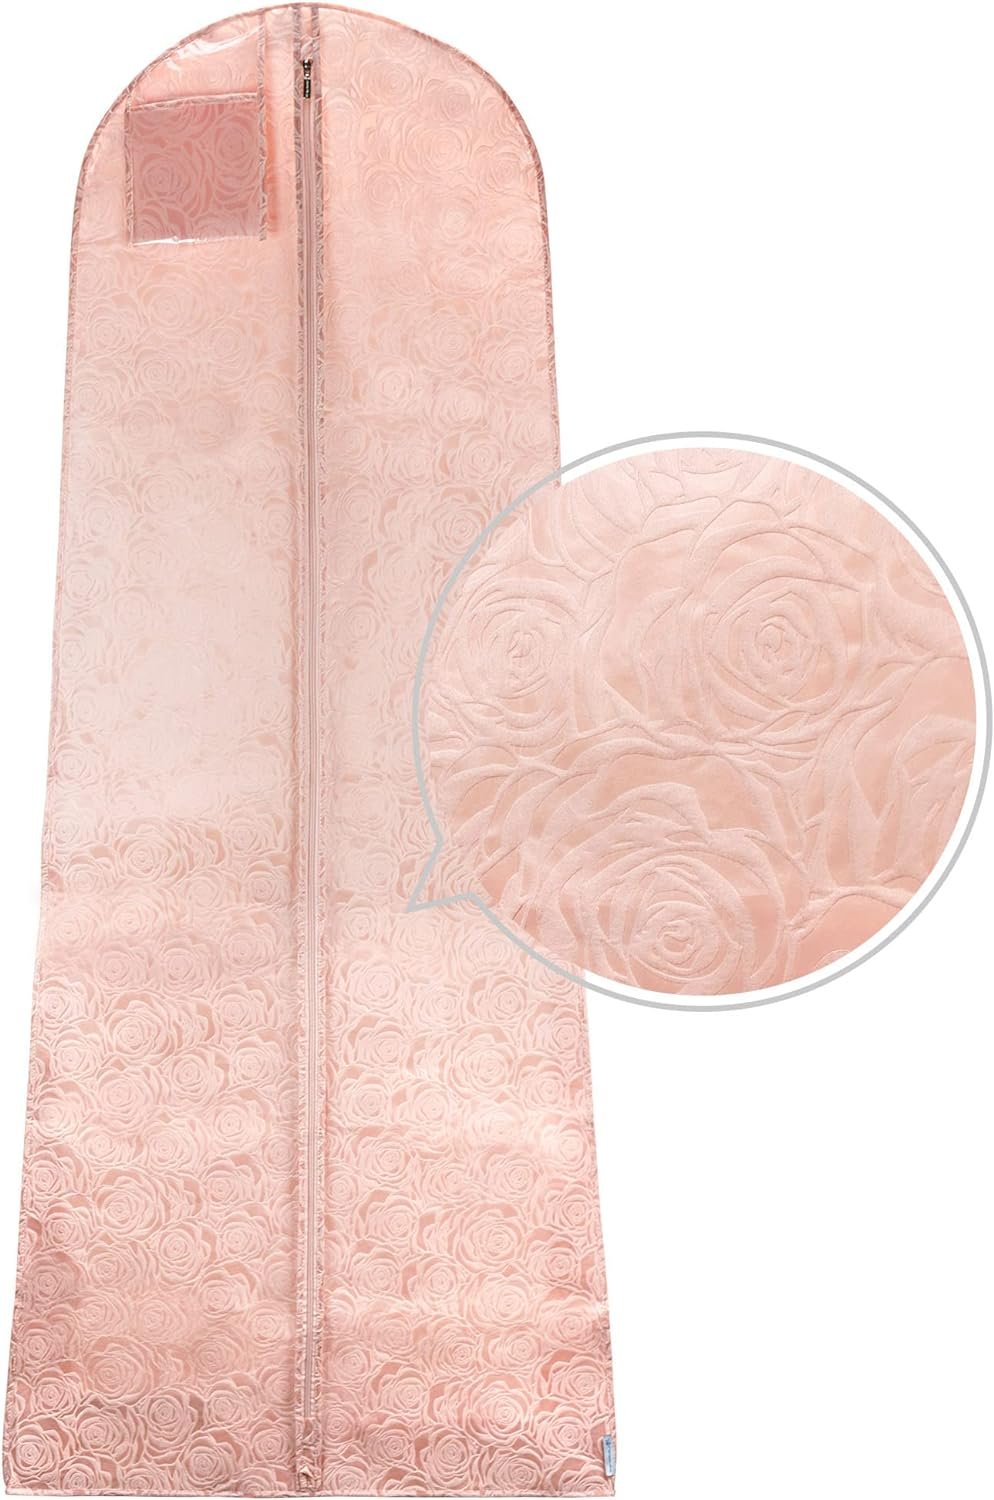 HANGERWORLD Rose Textured Pattern Dress Bags for Gowns Long 72 - Breathable (Dusty Pink, Single)